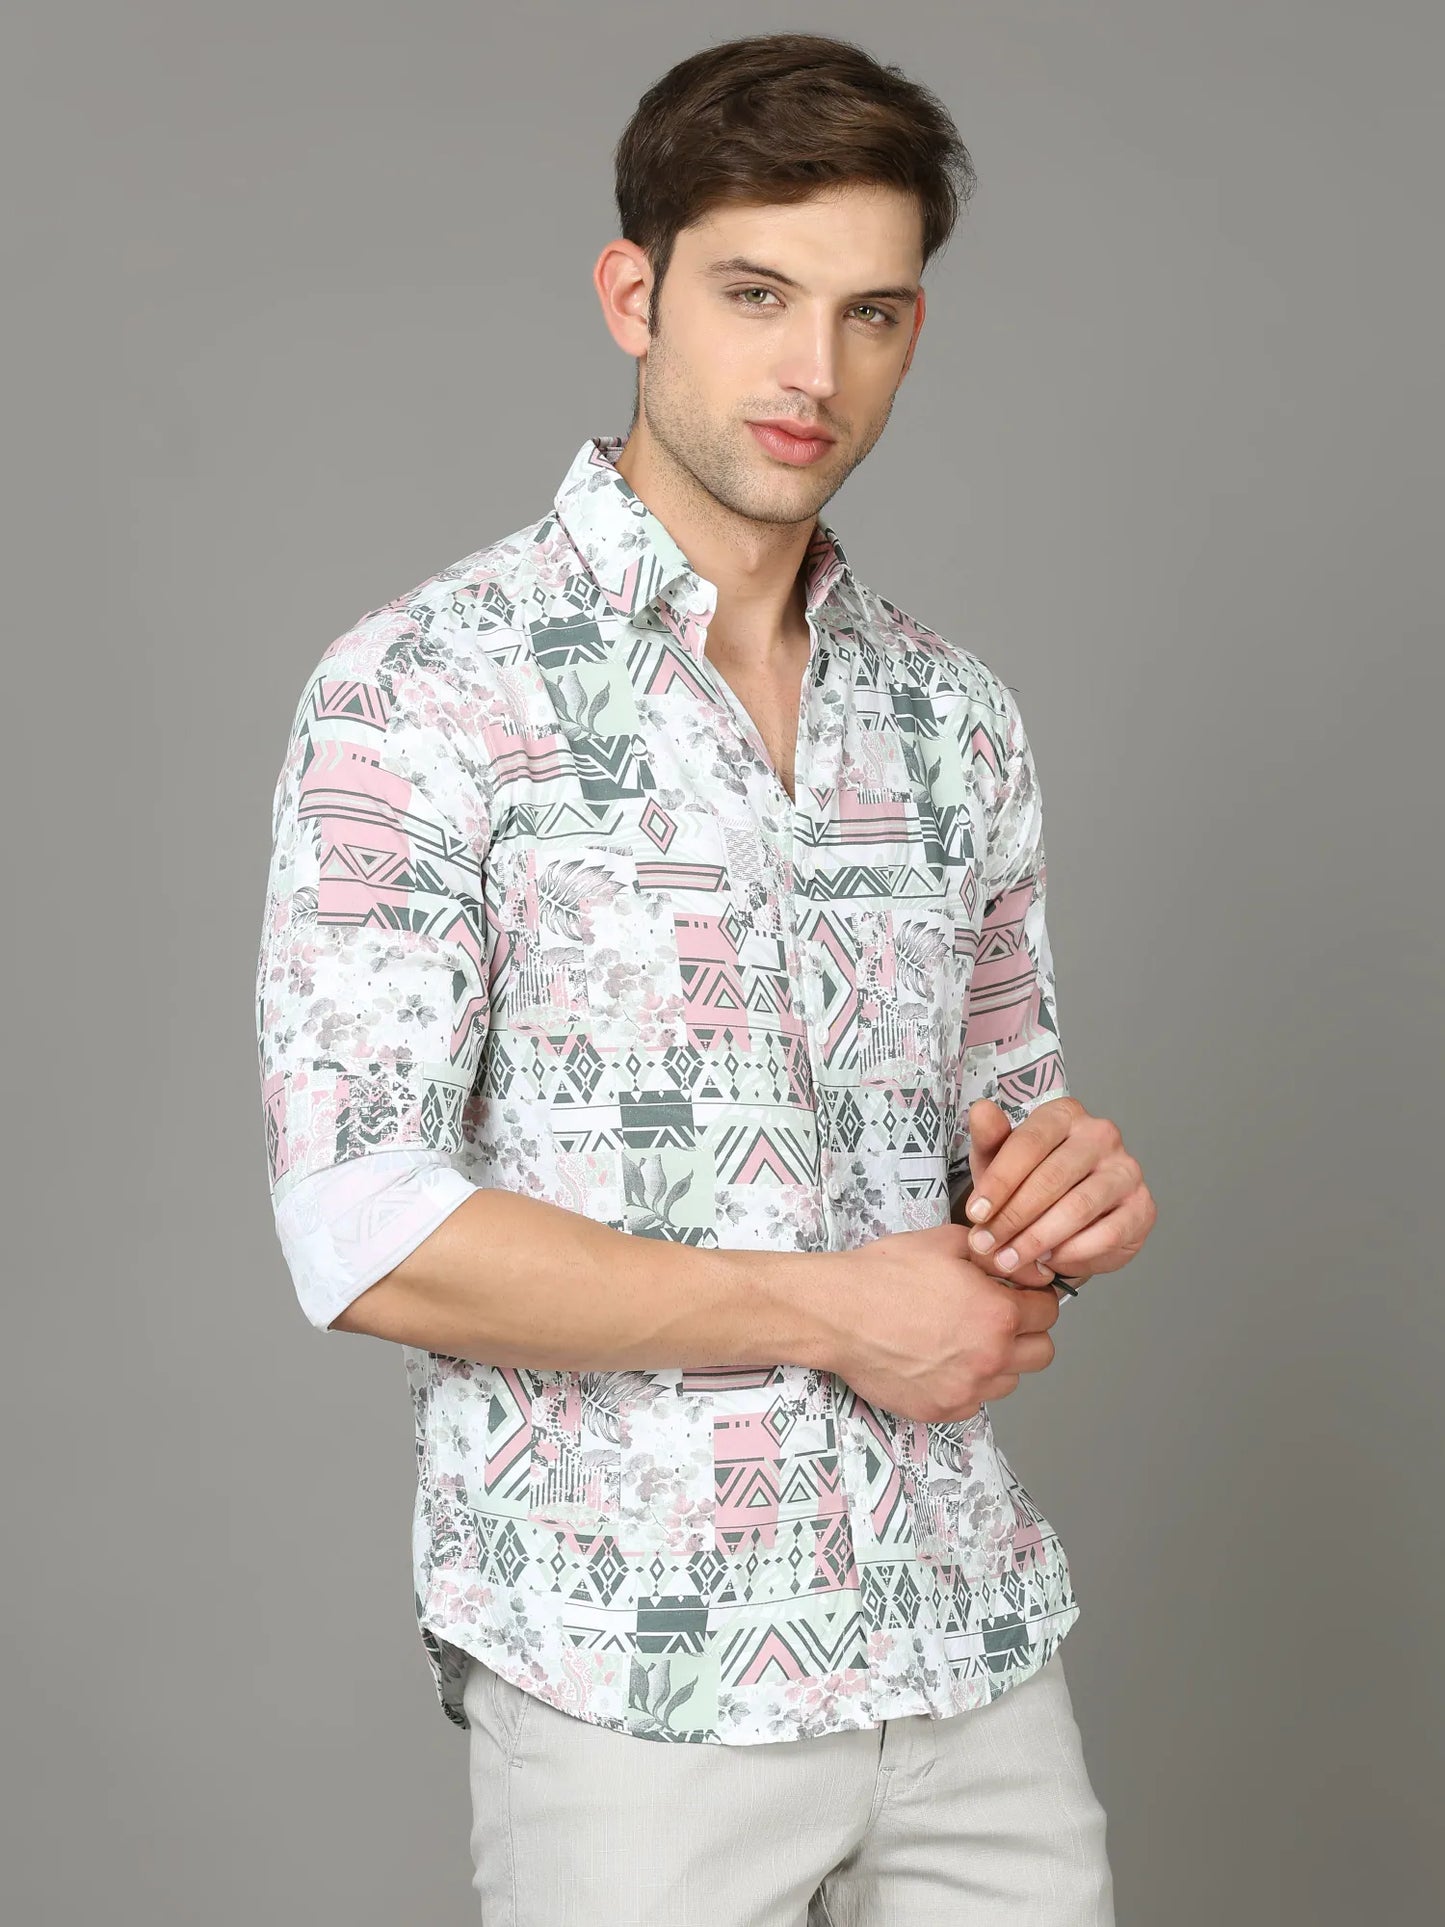 Bold Gentility: Pink Rayon Shirt for Confident Style